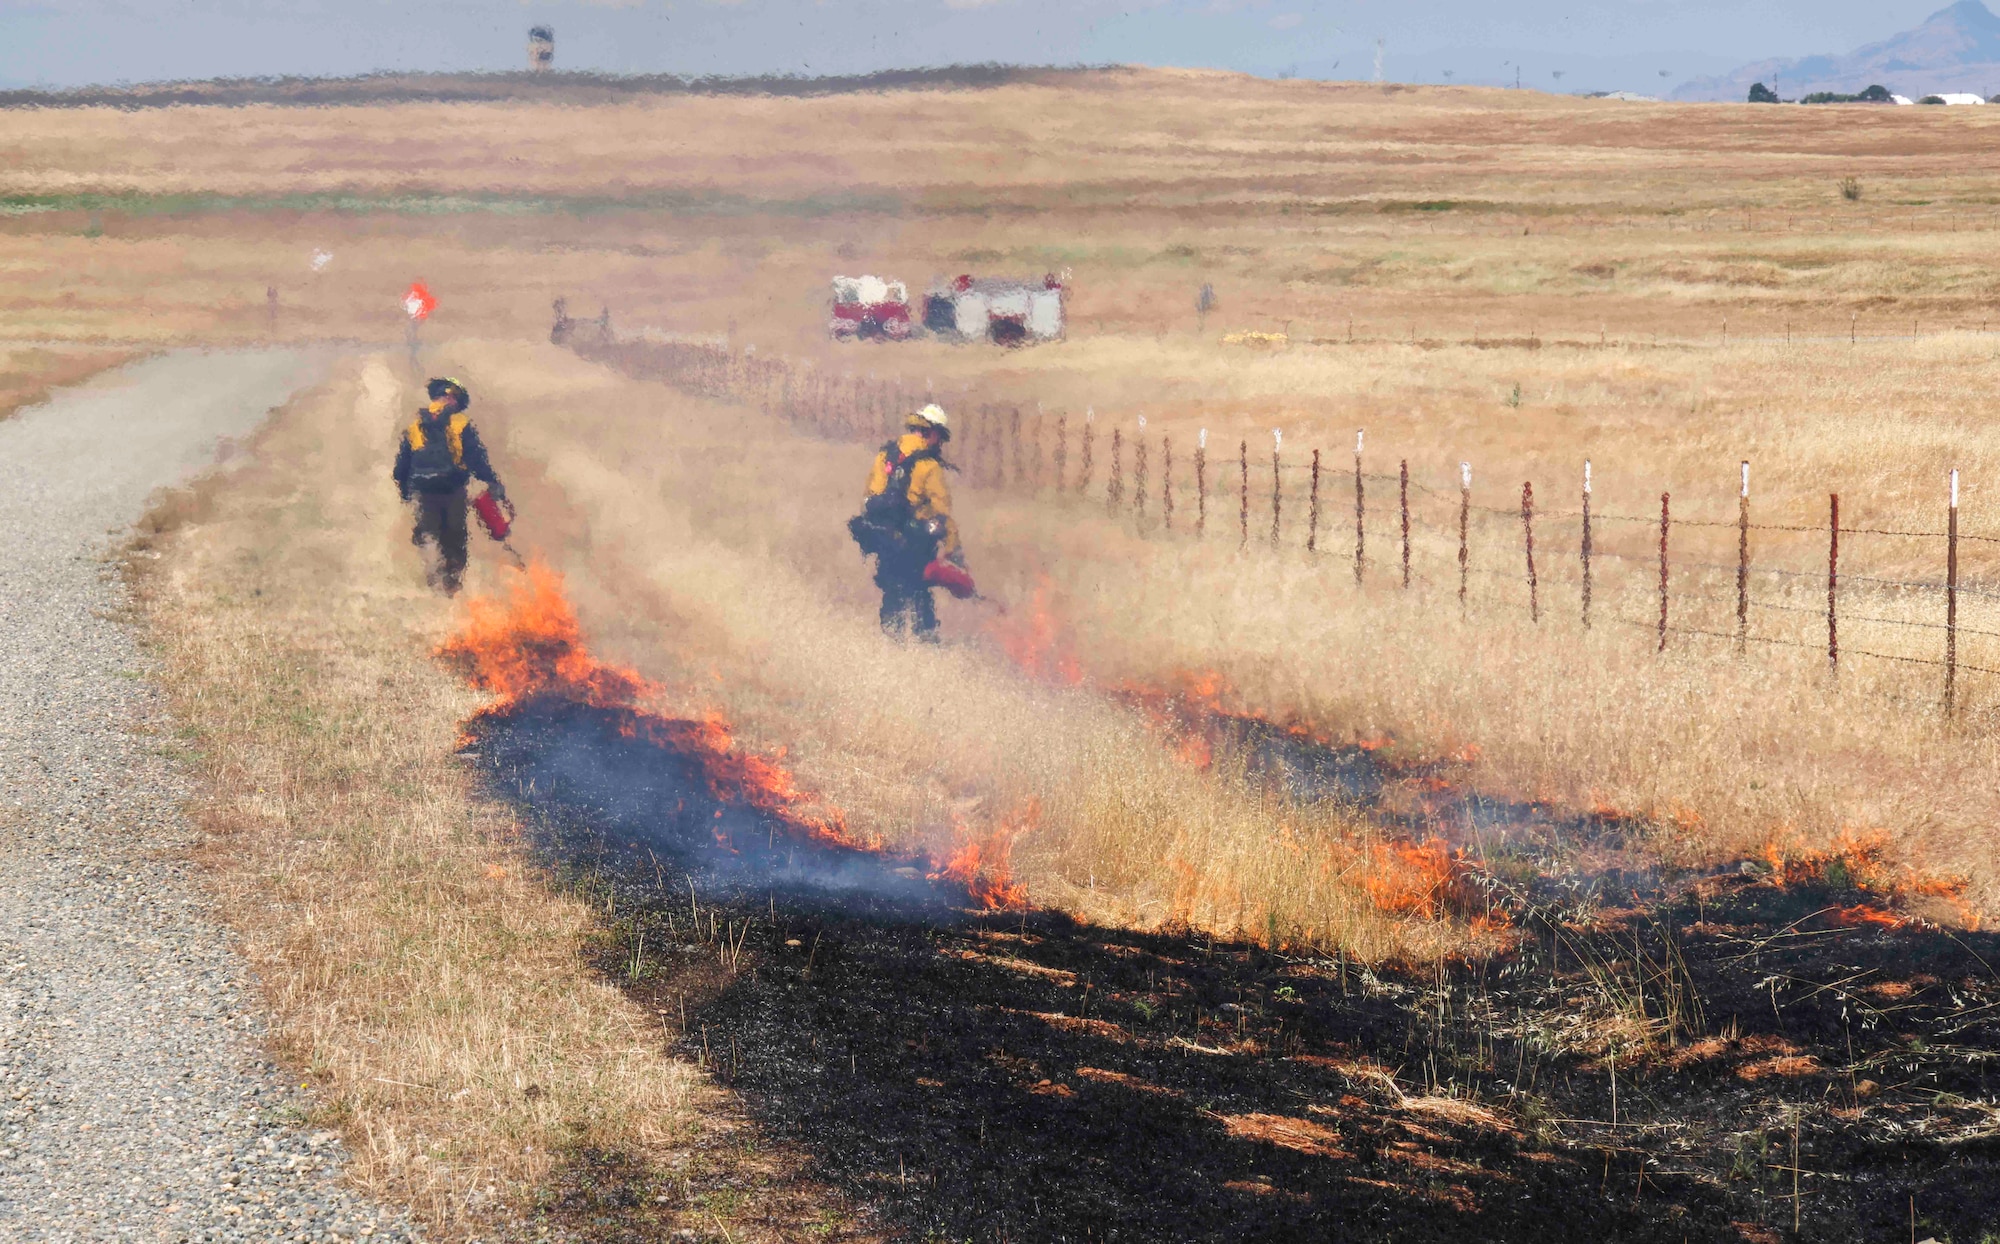 Crew members of the Air Force Civil Engineer Center Wildland Fire Support Module conduct a prescribed fire, also known as a controlled burn, on June 6th, 2022 at Beale Air Force Base, Calif.